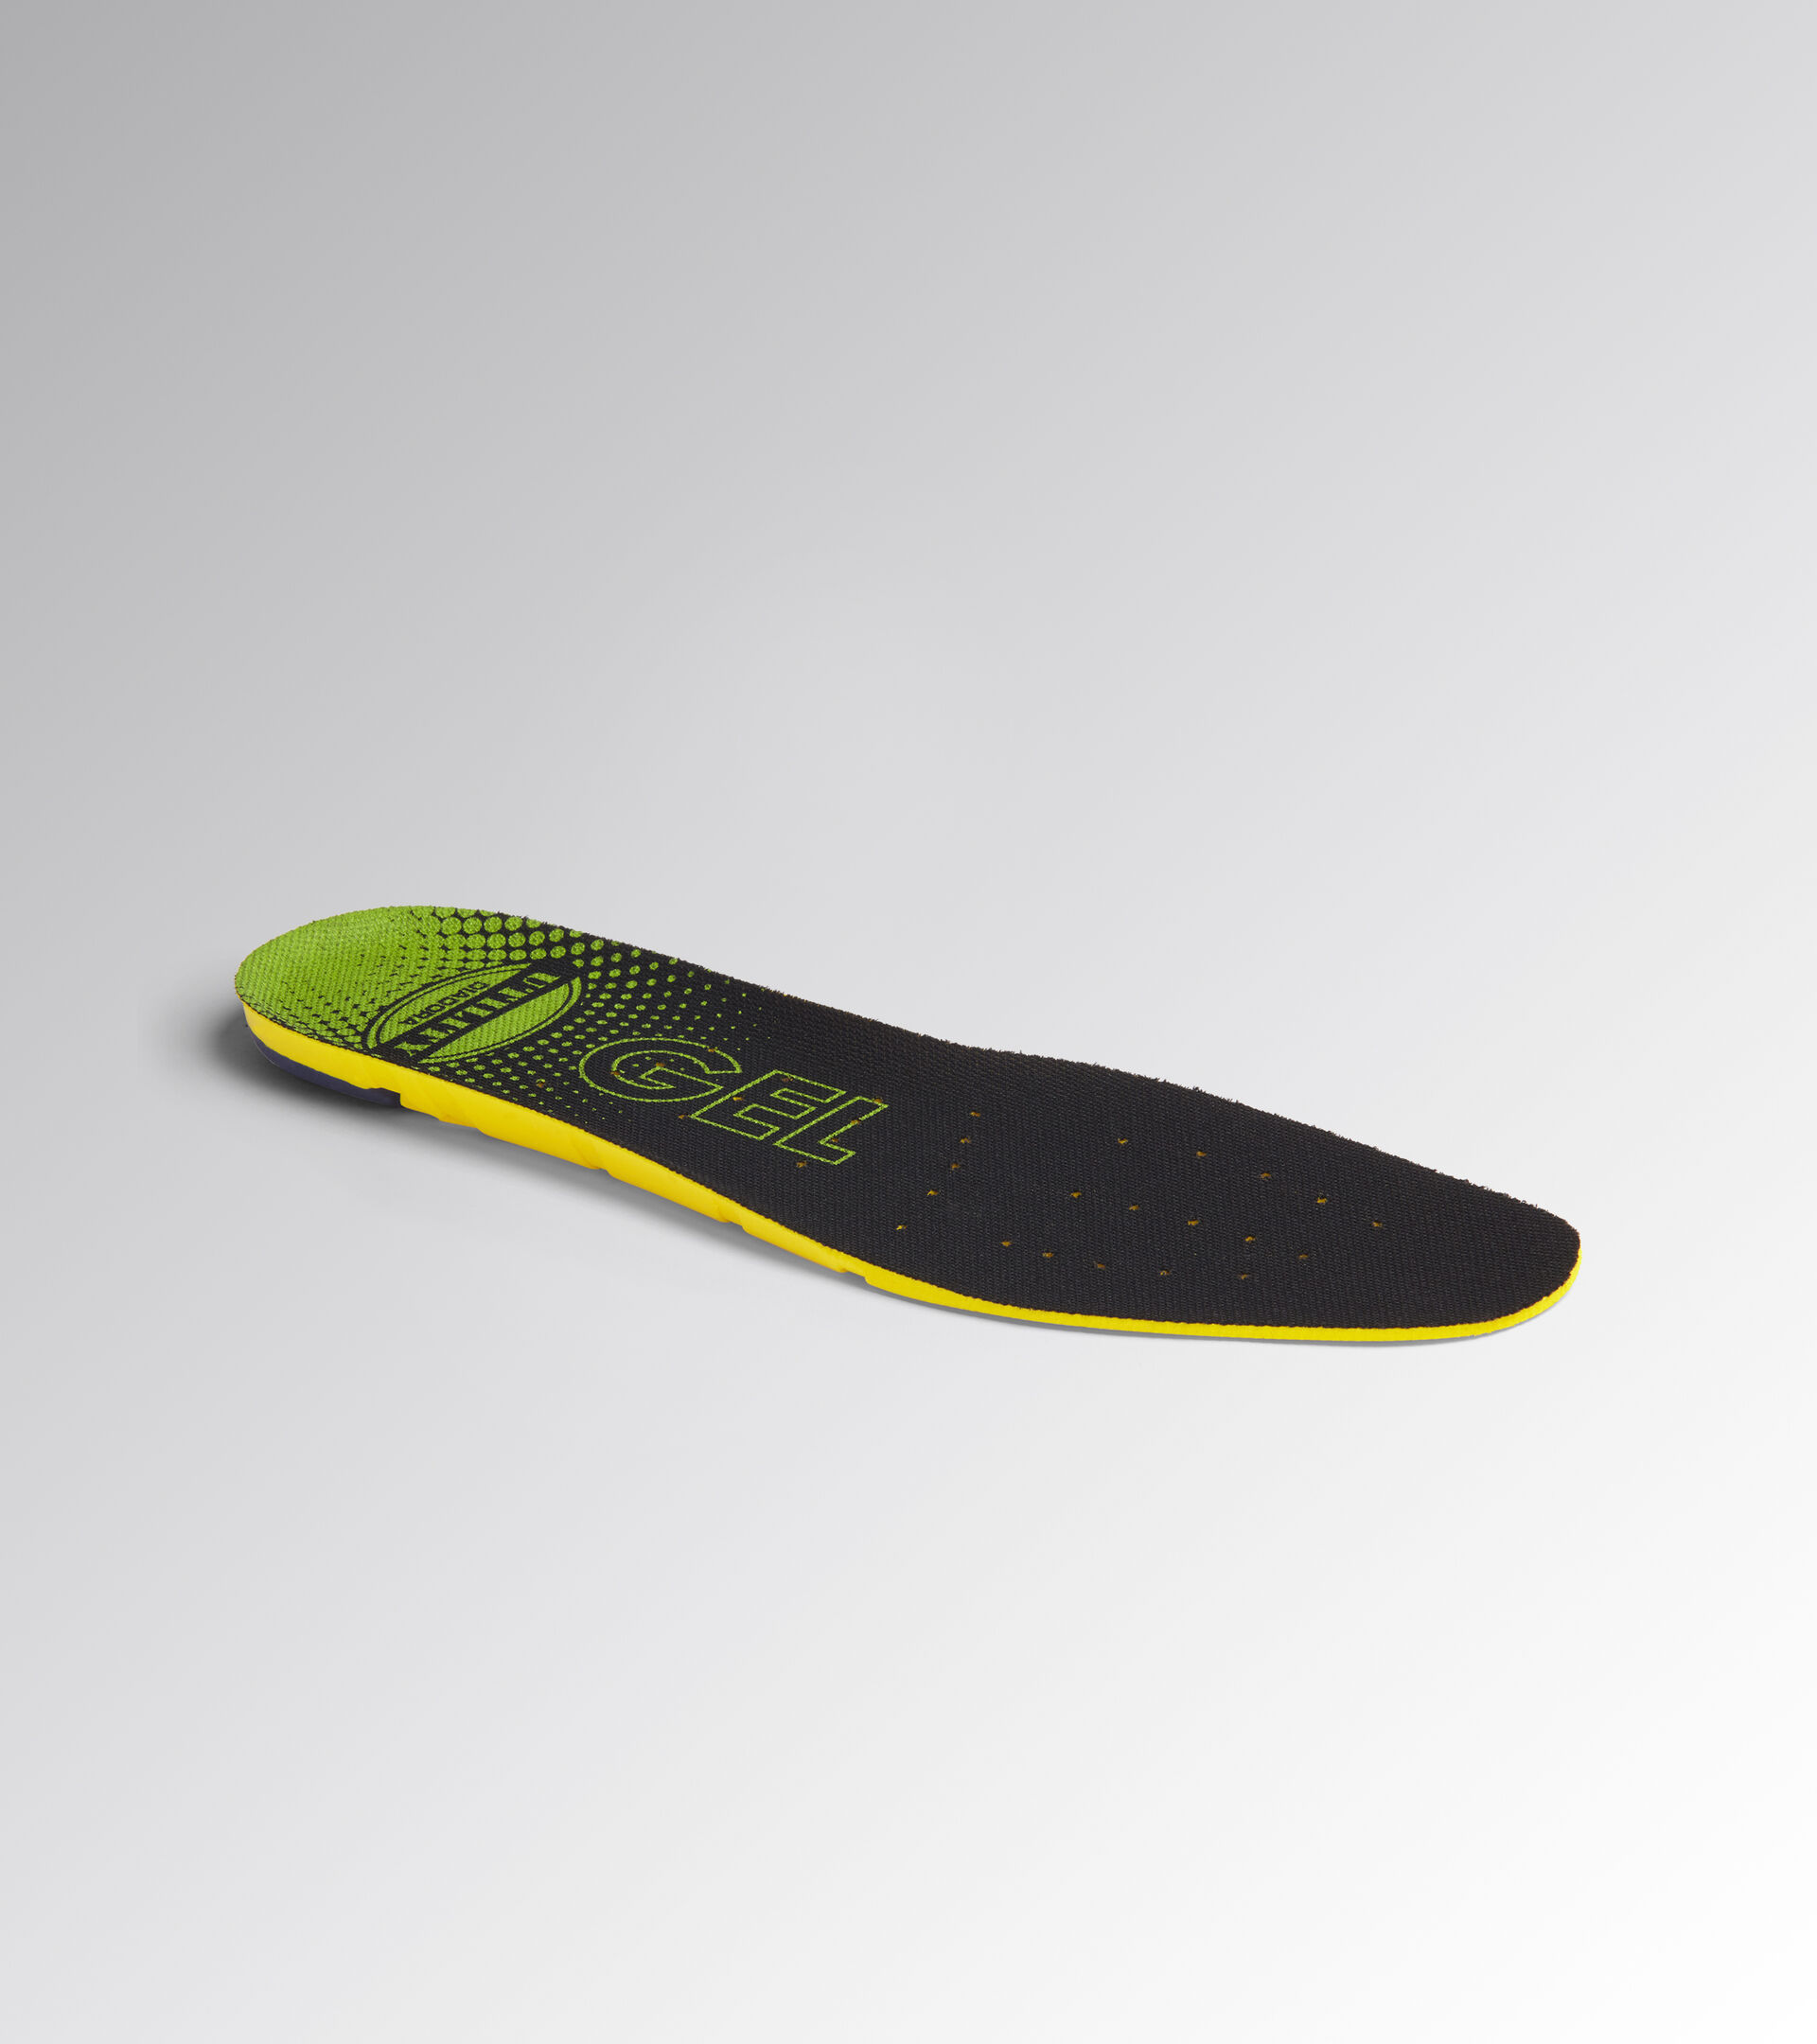 Insoles for Utility shoes INSOLE GEL RELAX CLASSIC GREEN/YELLOW UTILITY - Utility